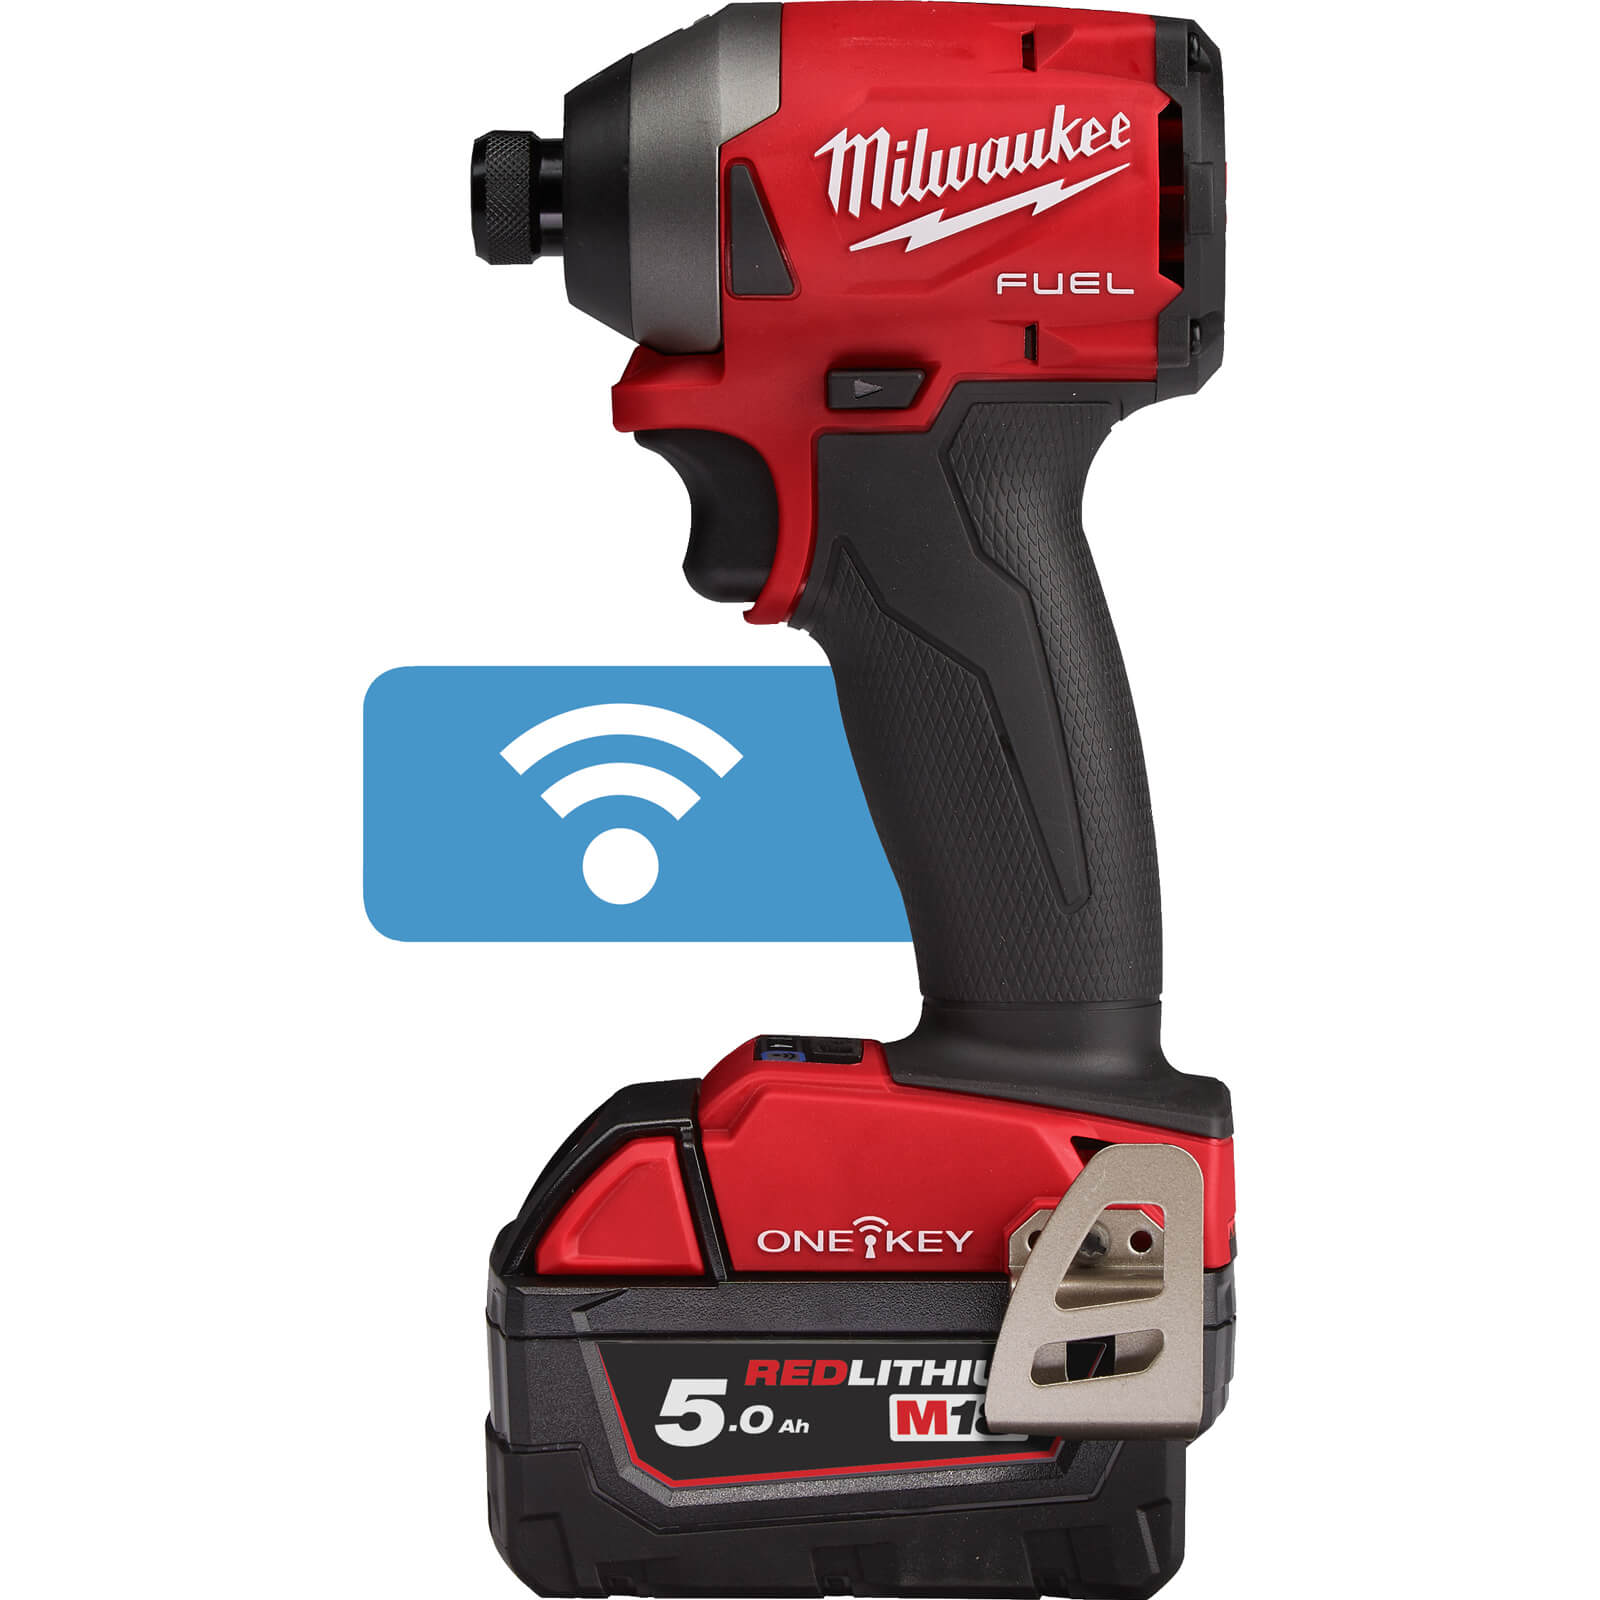 Milwaukee M18 ONEID2 Fuel 18v Cordless Brushless Impact Driver 2 x 5ah Li-ion Charger Case